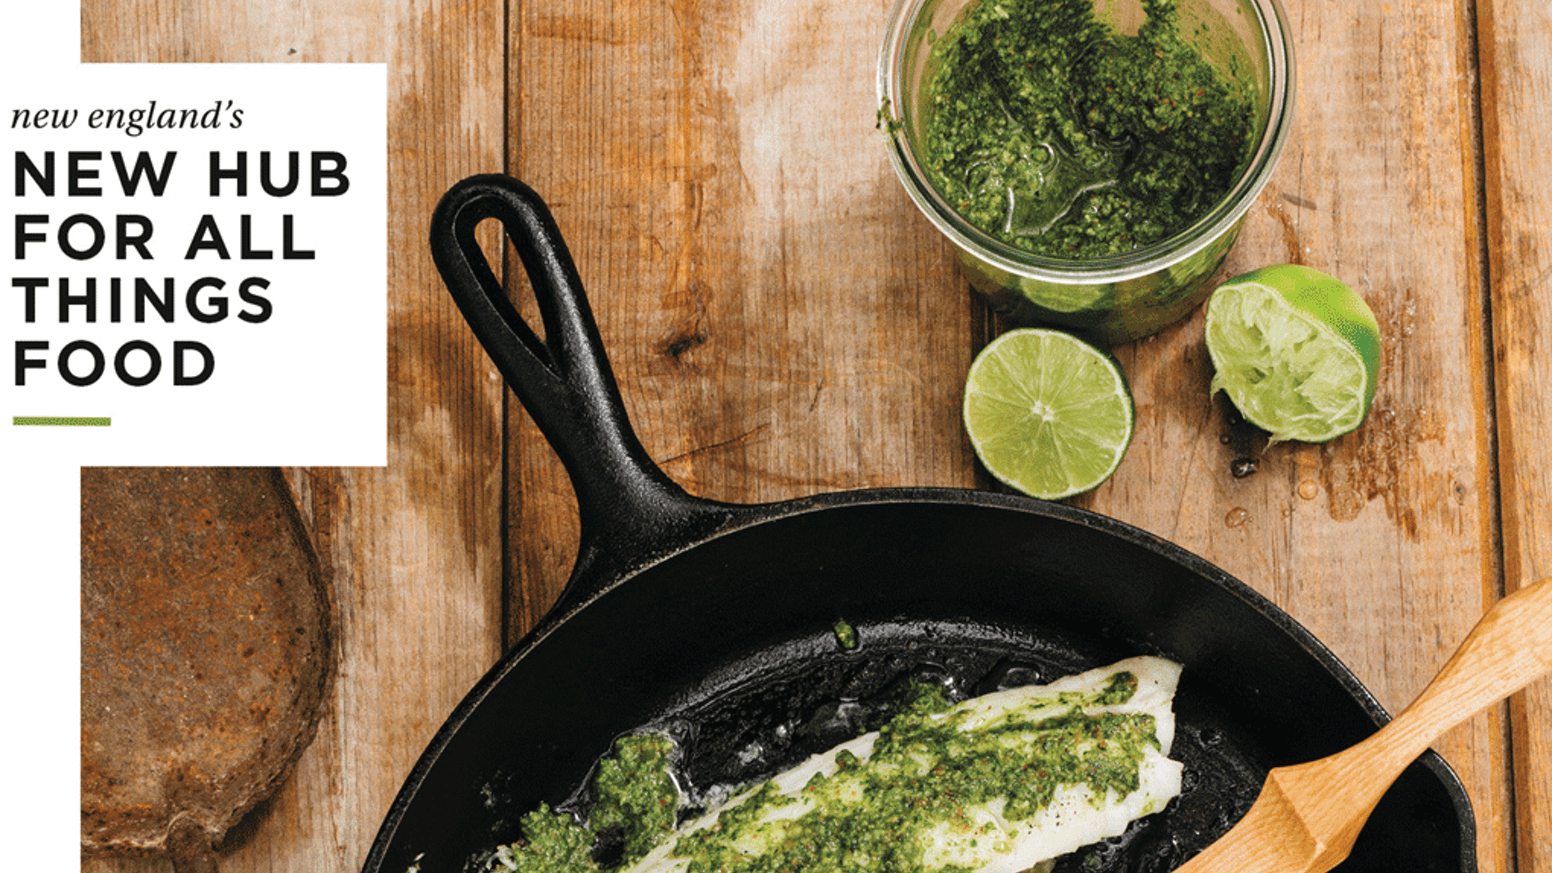 Cast Iron Skillet, limes, pesto and fish on wood background  